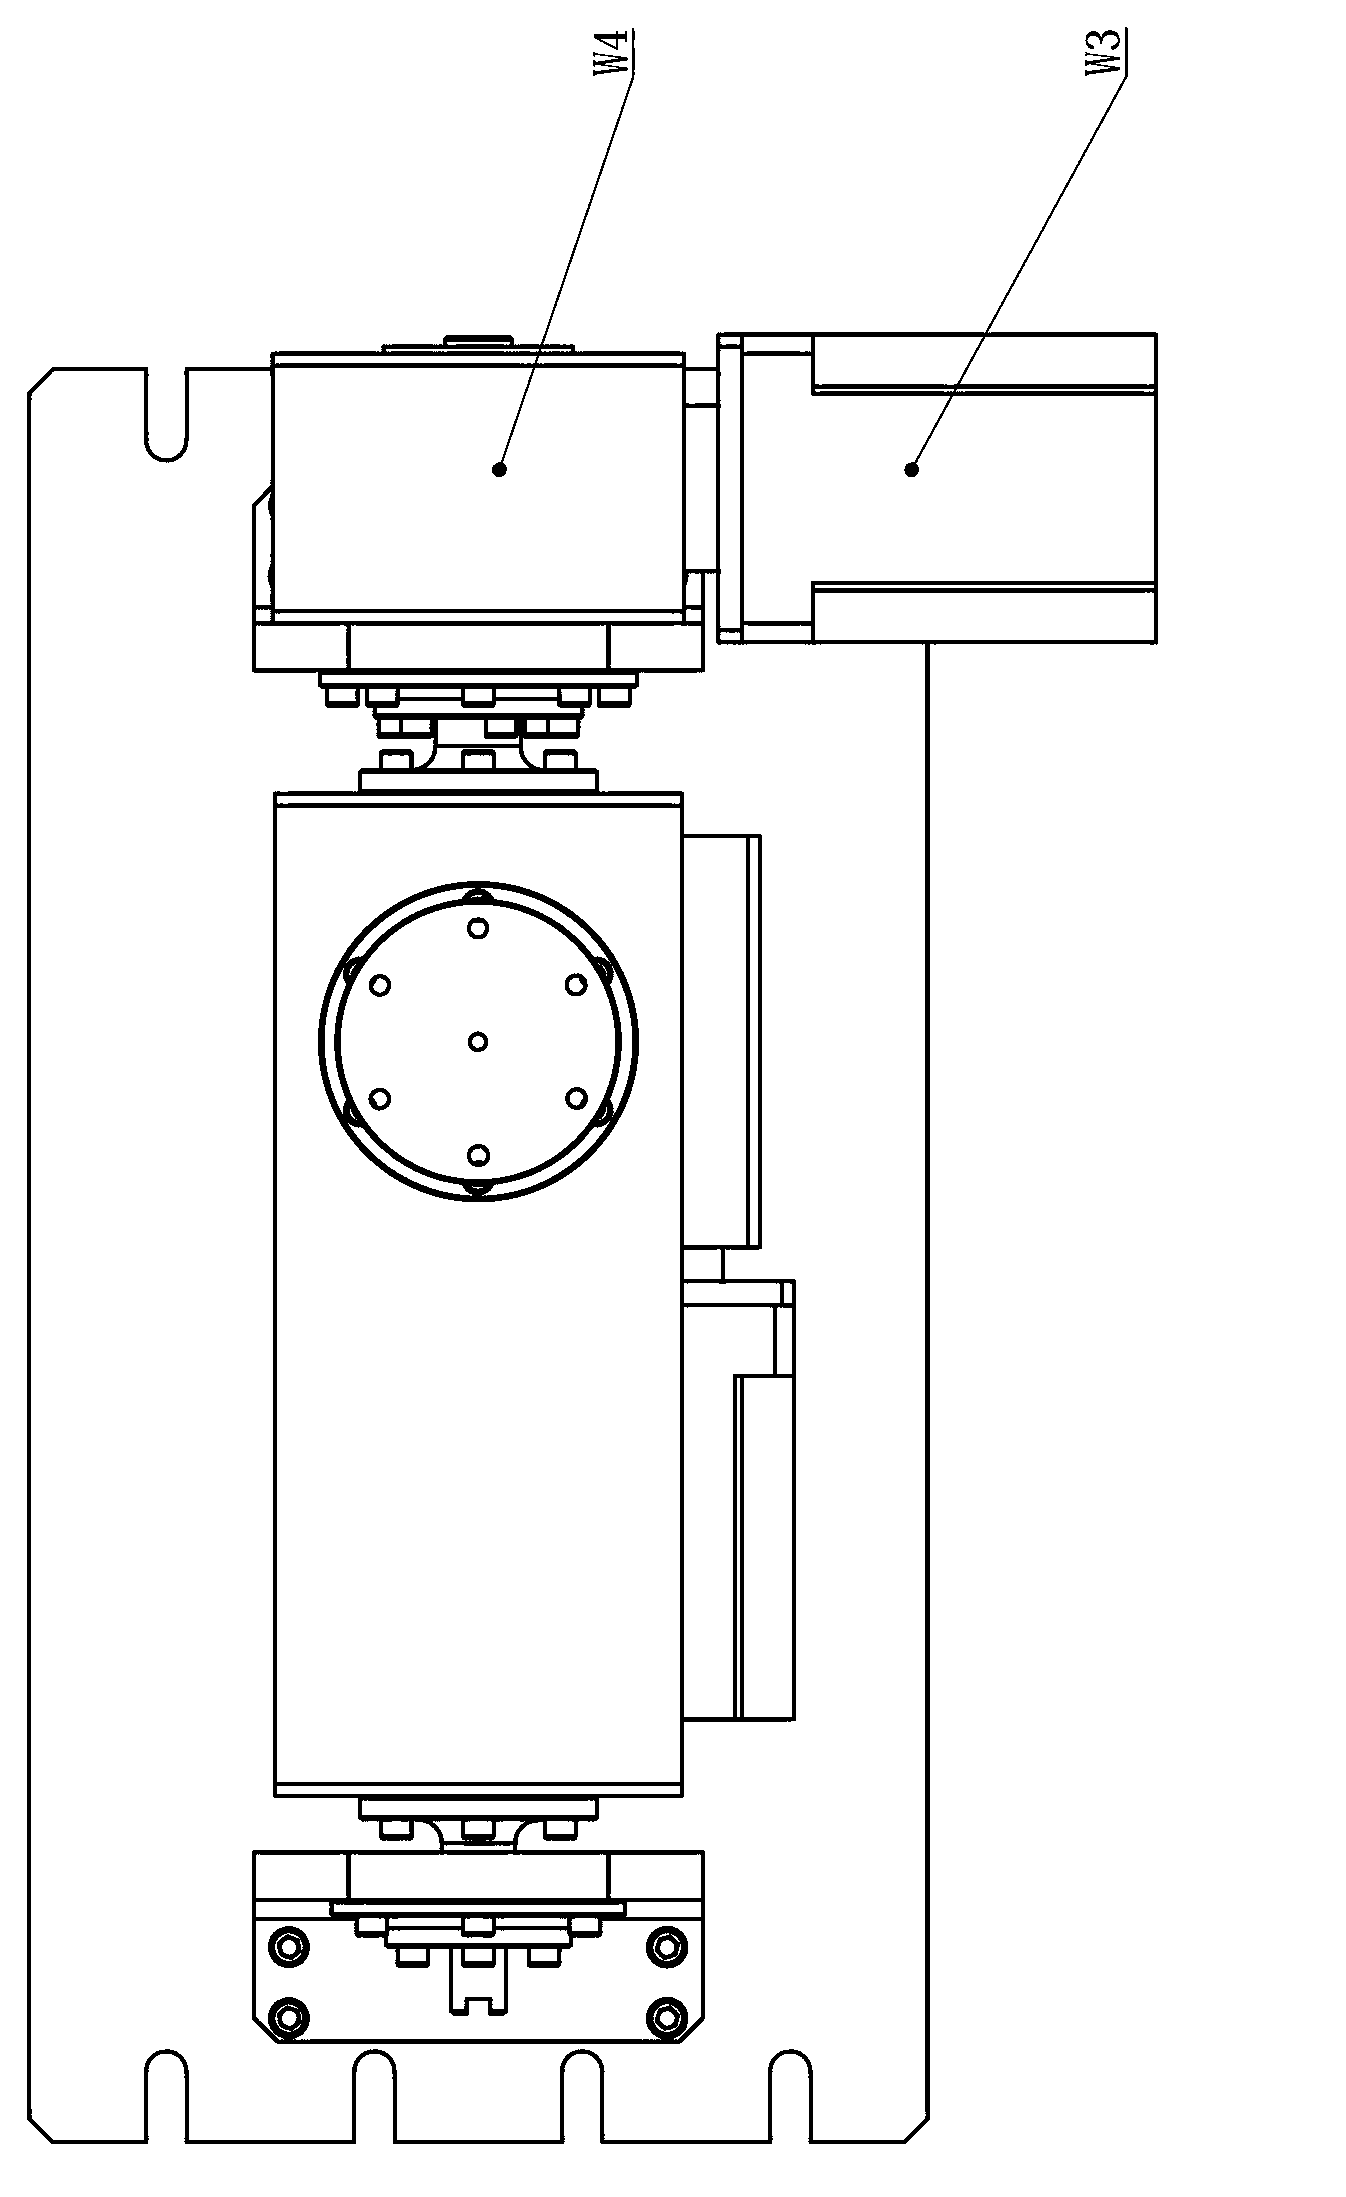 Numerical control double-shaft rotary table